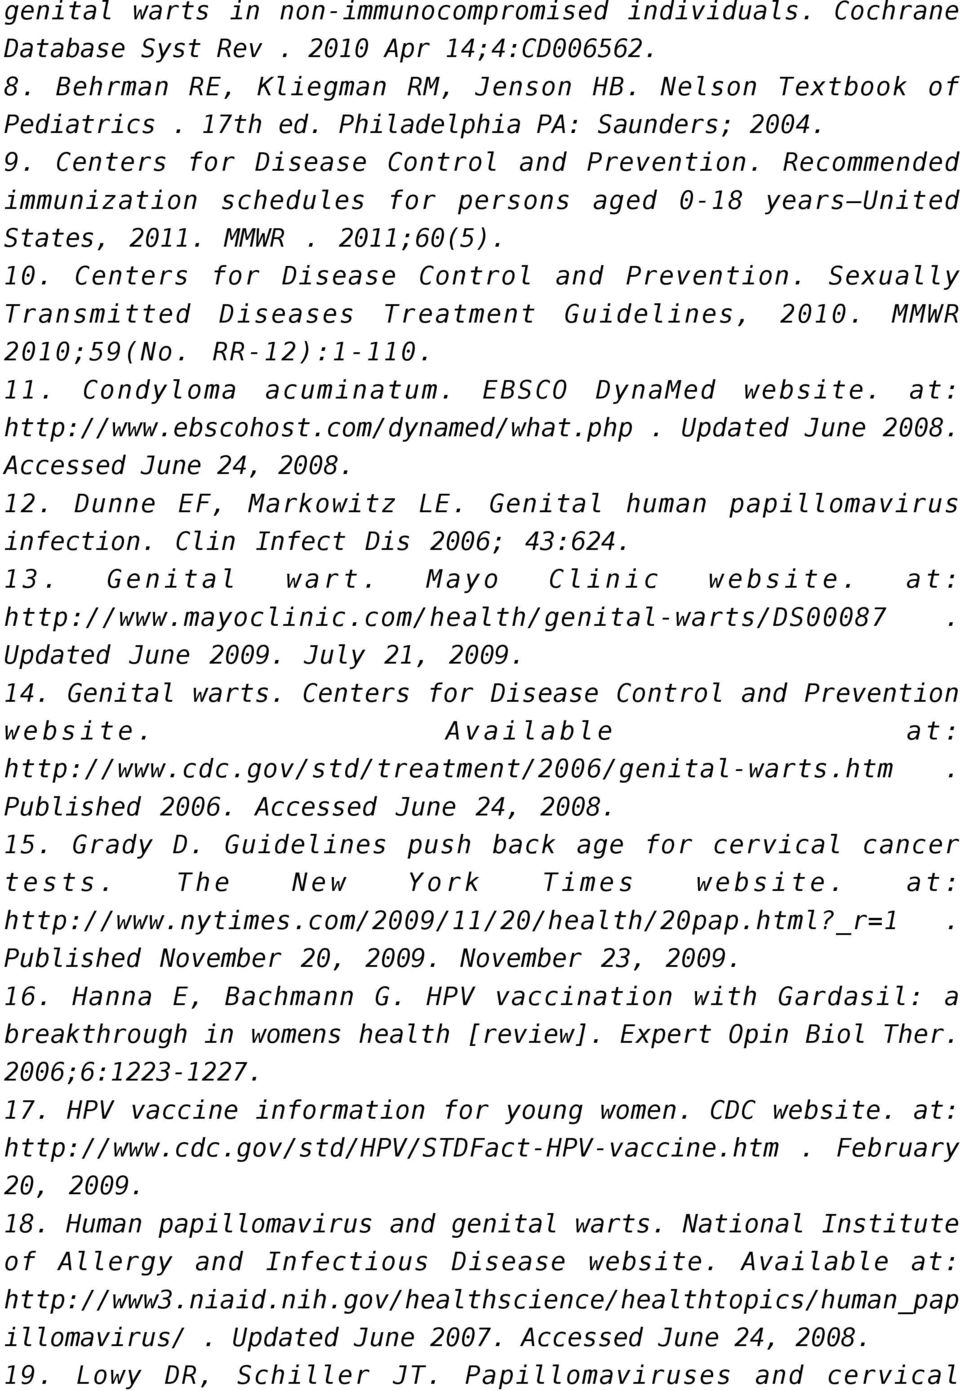 Centers for Disease Control and Prevention. Sexually Transmitted Diseases Treatment Guidelines, 2010. MMWR 2010;59(No. RR-12):1-110. 11. Condyloma acuminatum. EBSCO DynaMed website. at: http://www.